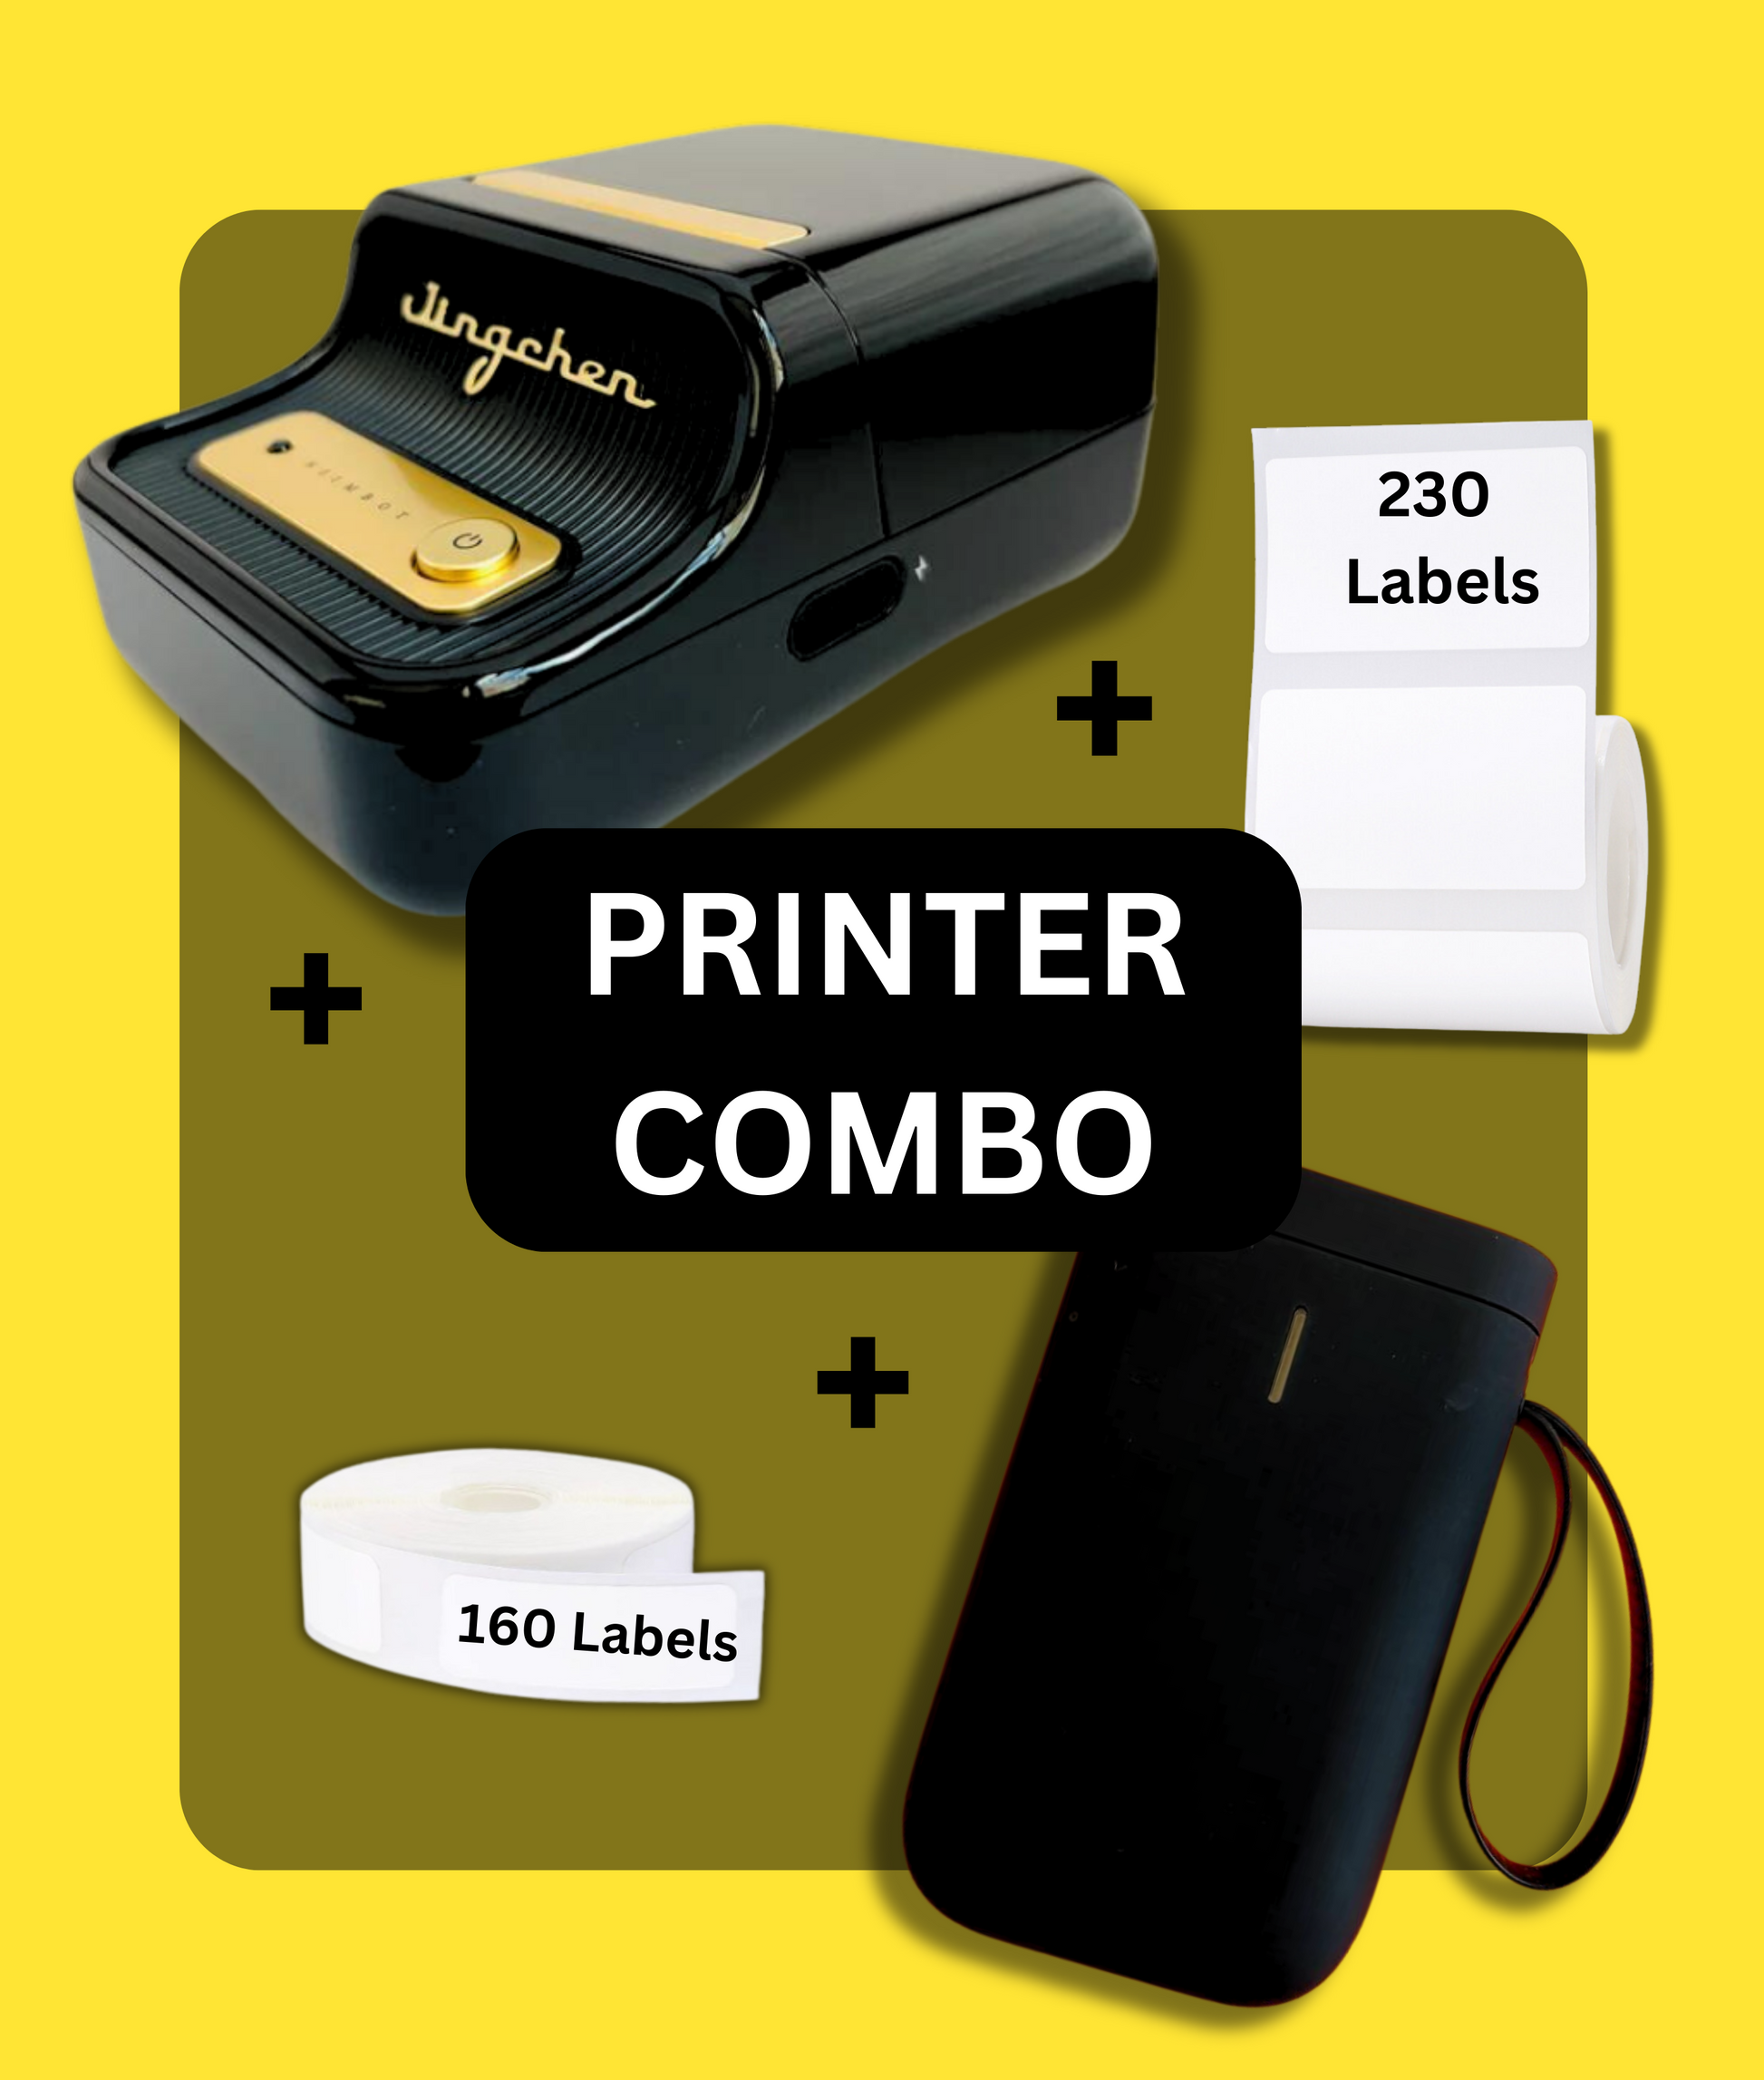 B21 Label Maker Machine with Tape - Efficient Labeling Solution — NIIMBOT